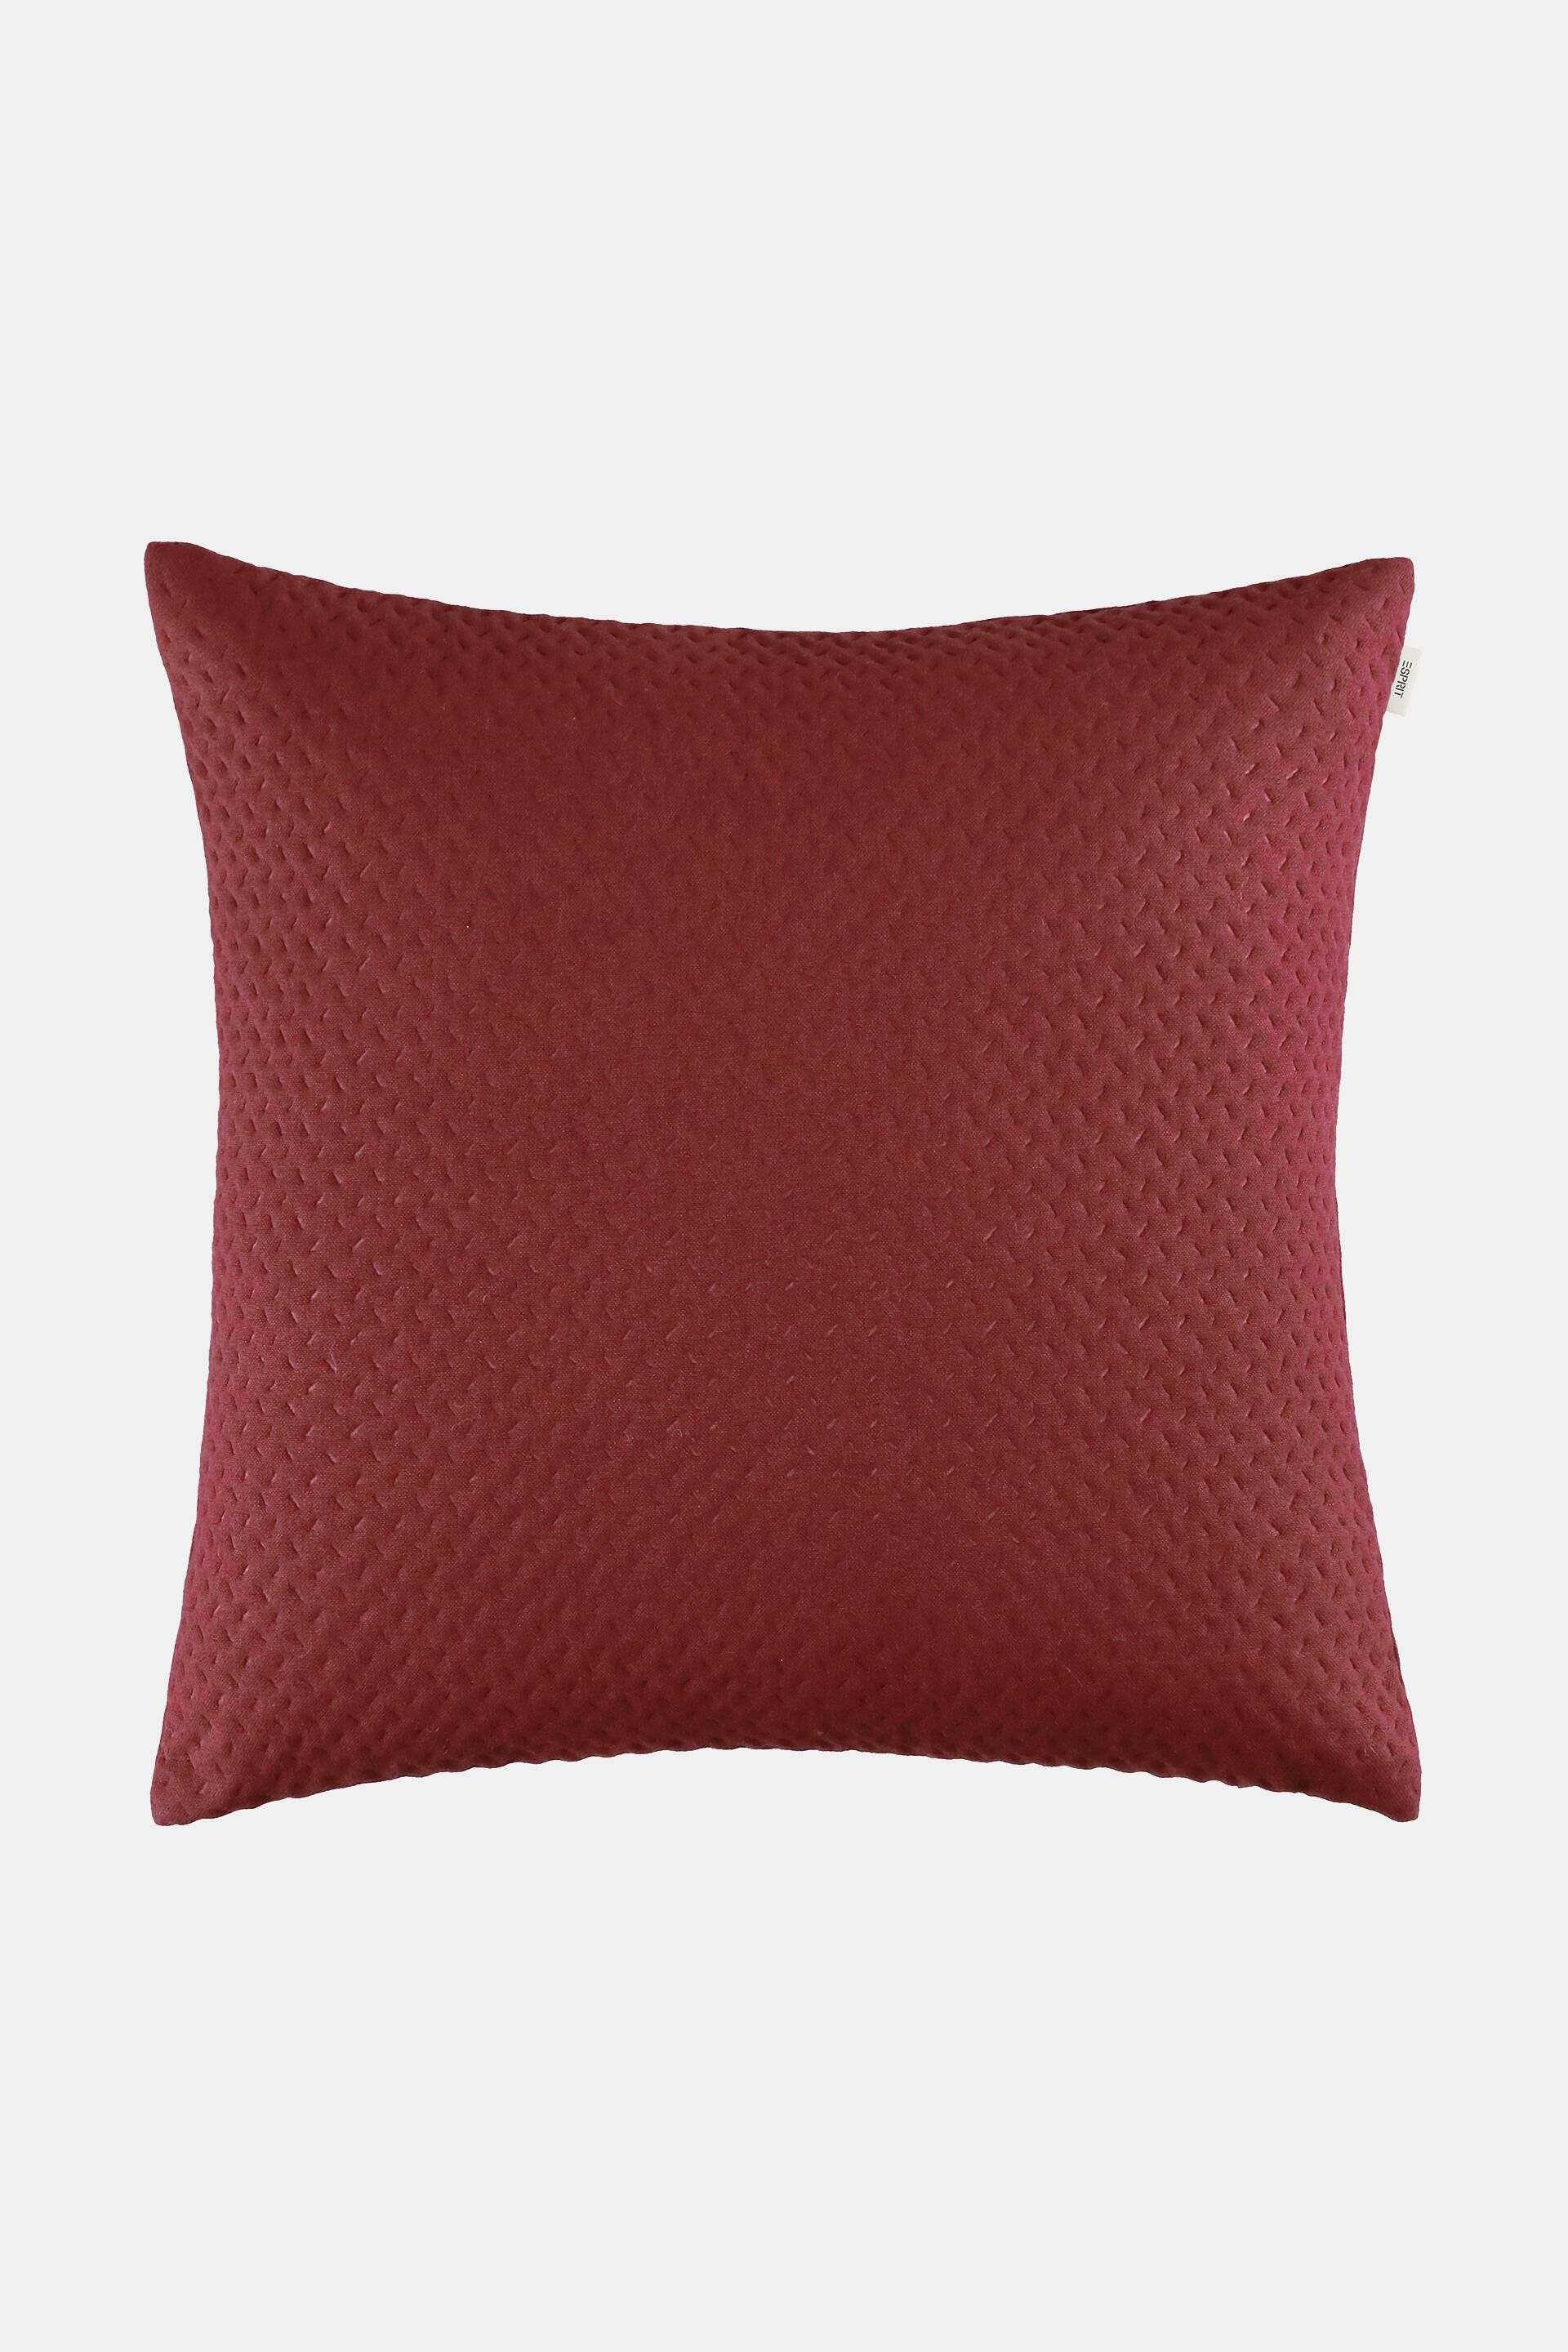 Esprit Large, woven cover cushion lounge